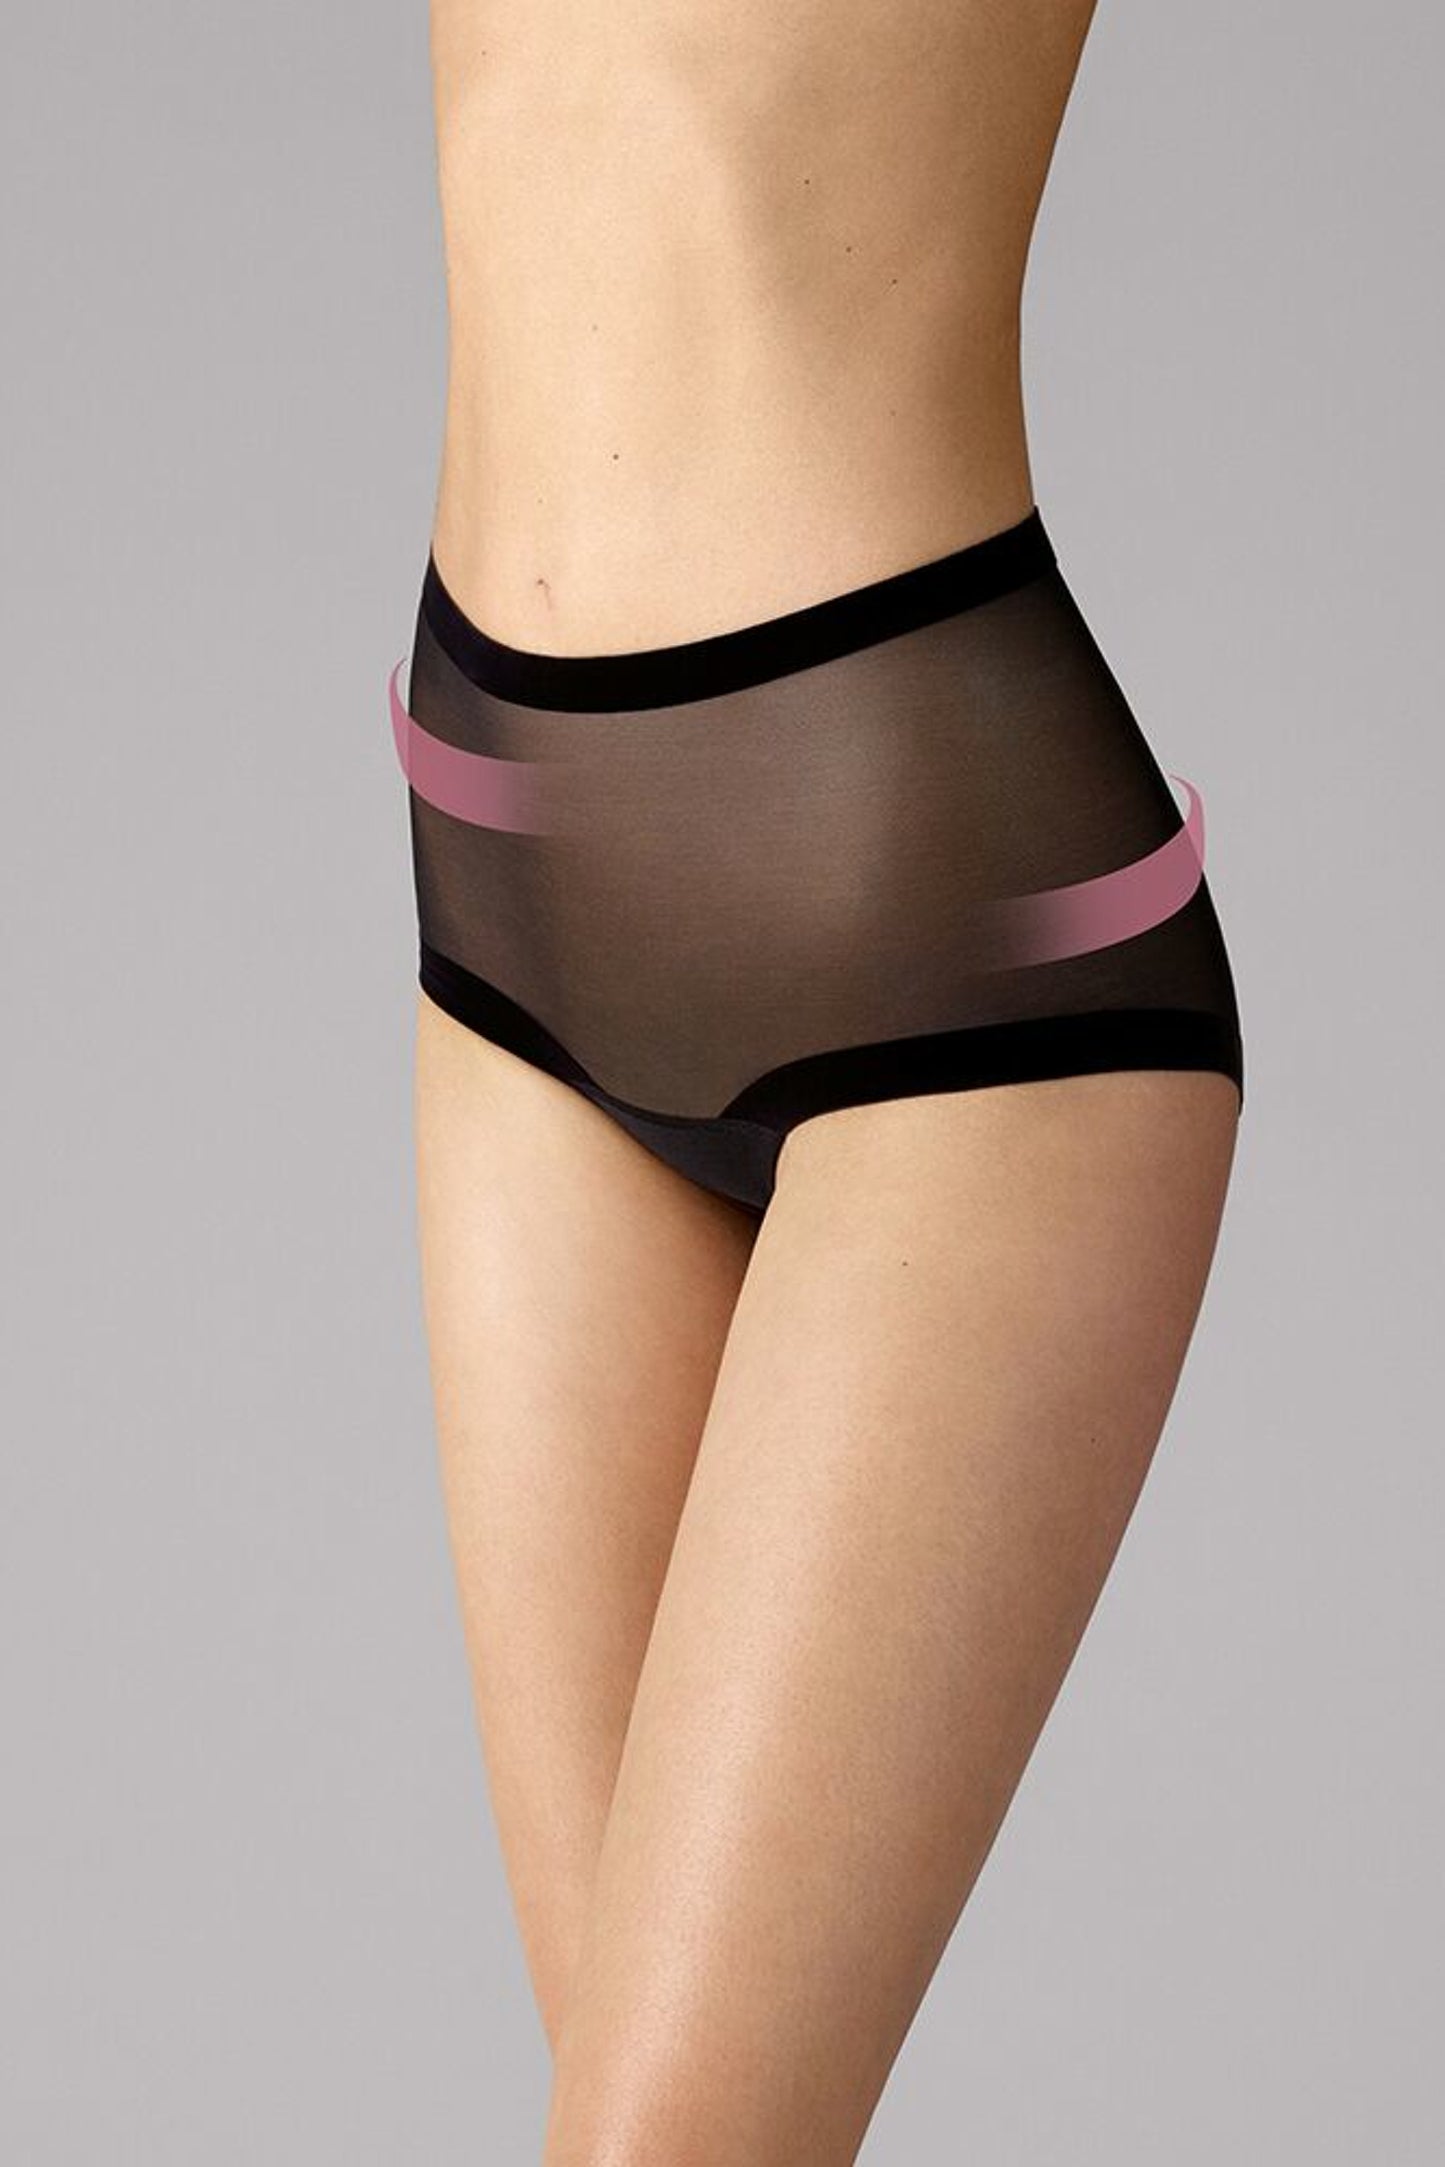 Wolford Tulle Control Panty freeshipping - TrousseauOfDallas